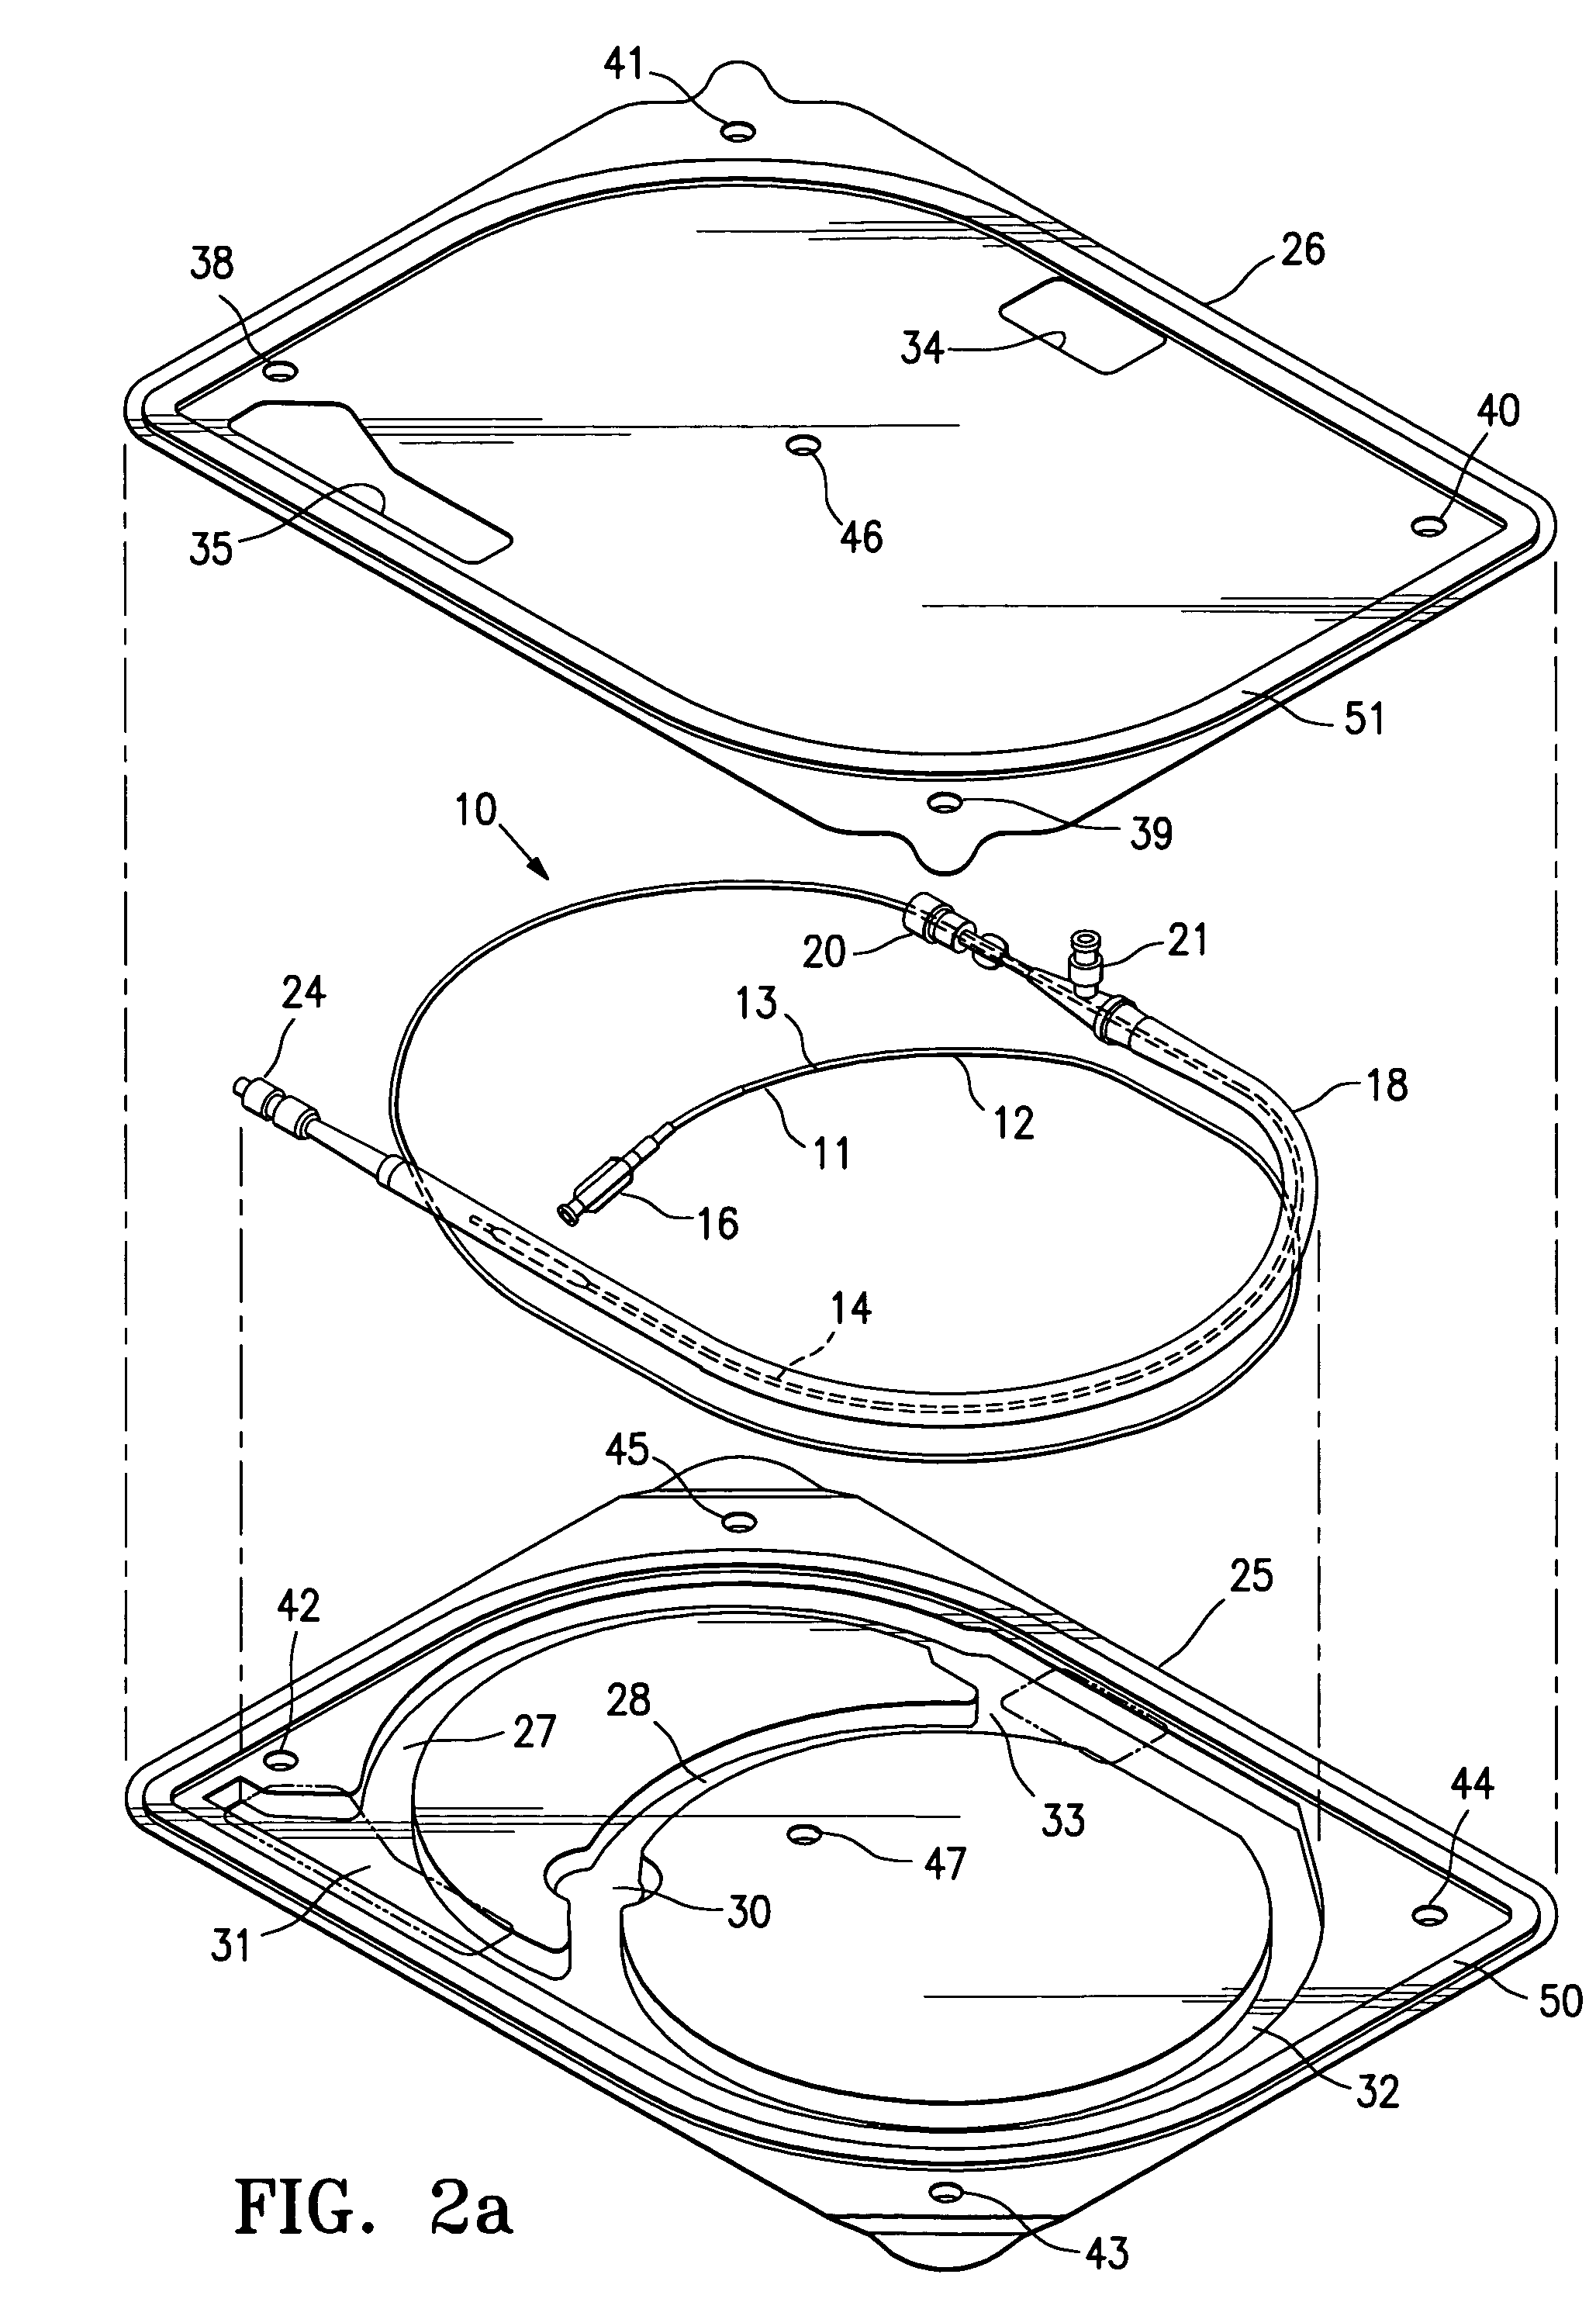 Protected stent delivery system and packaging